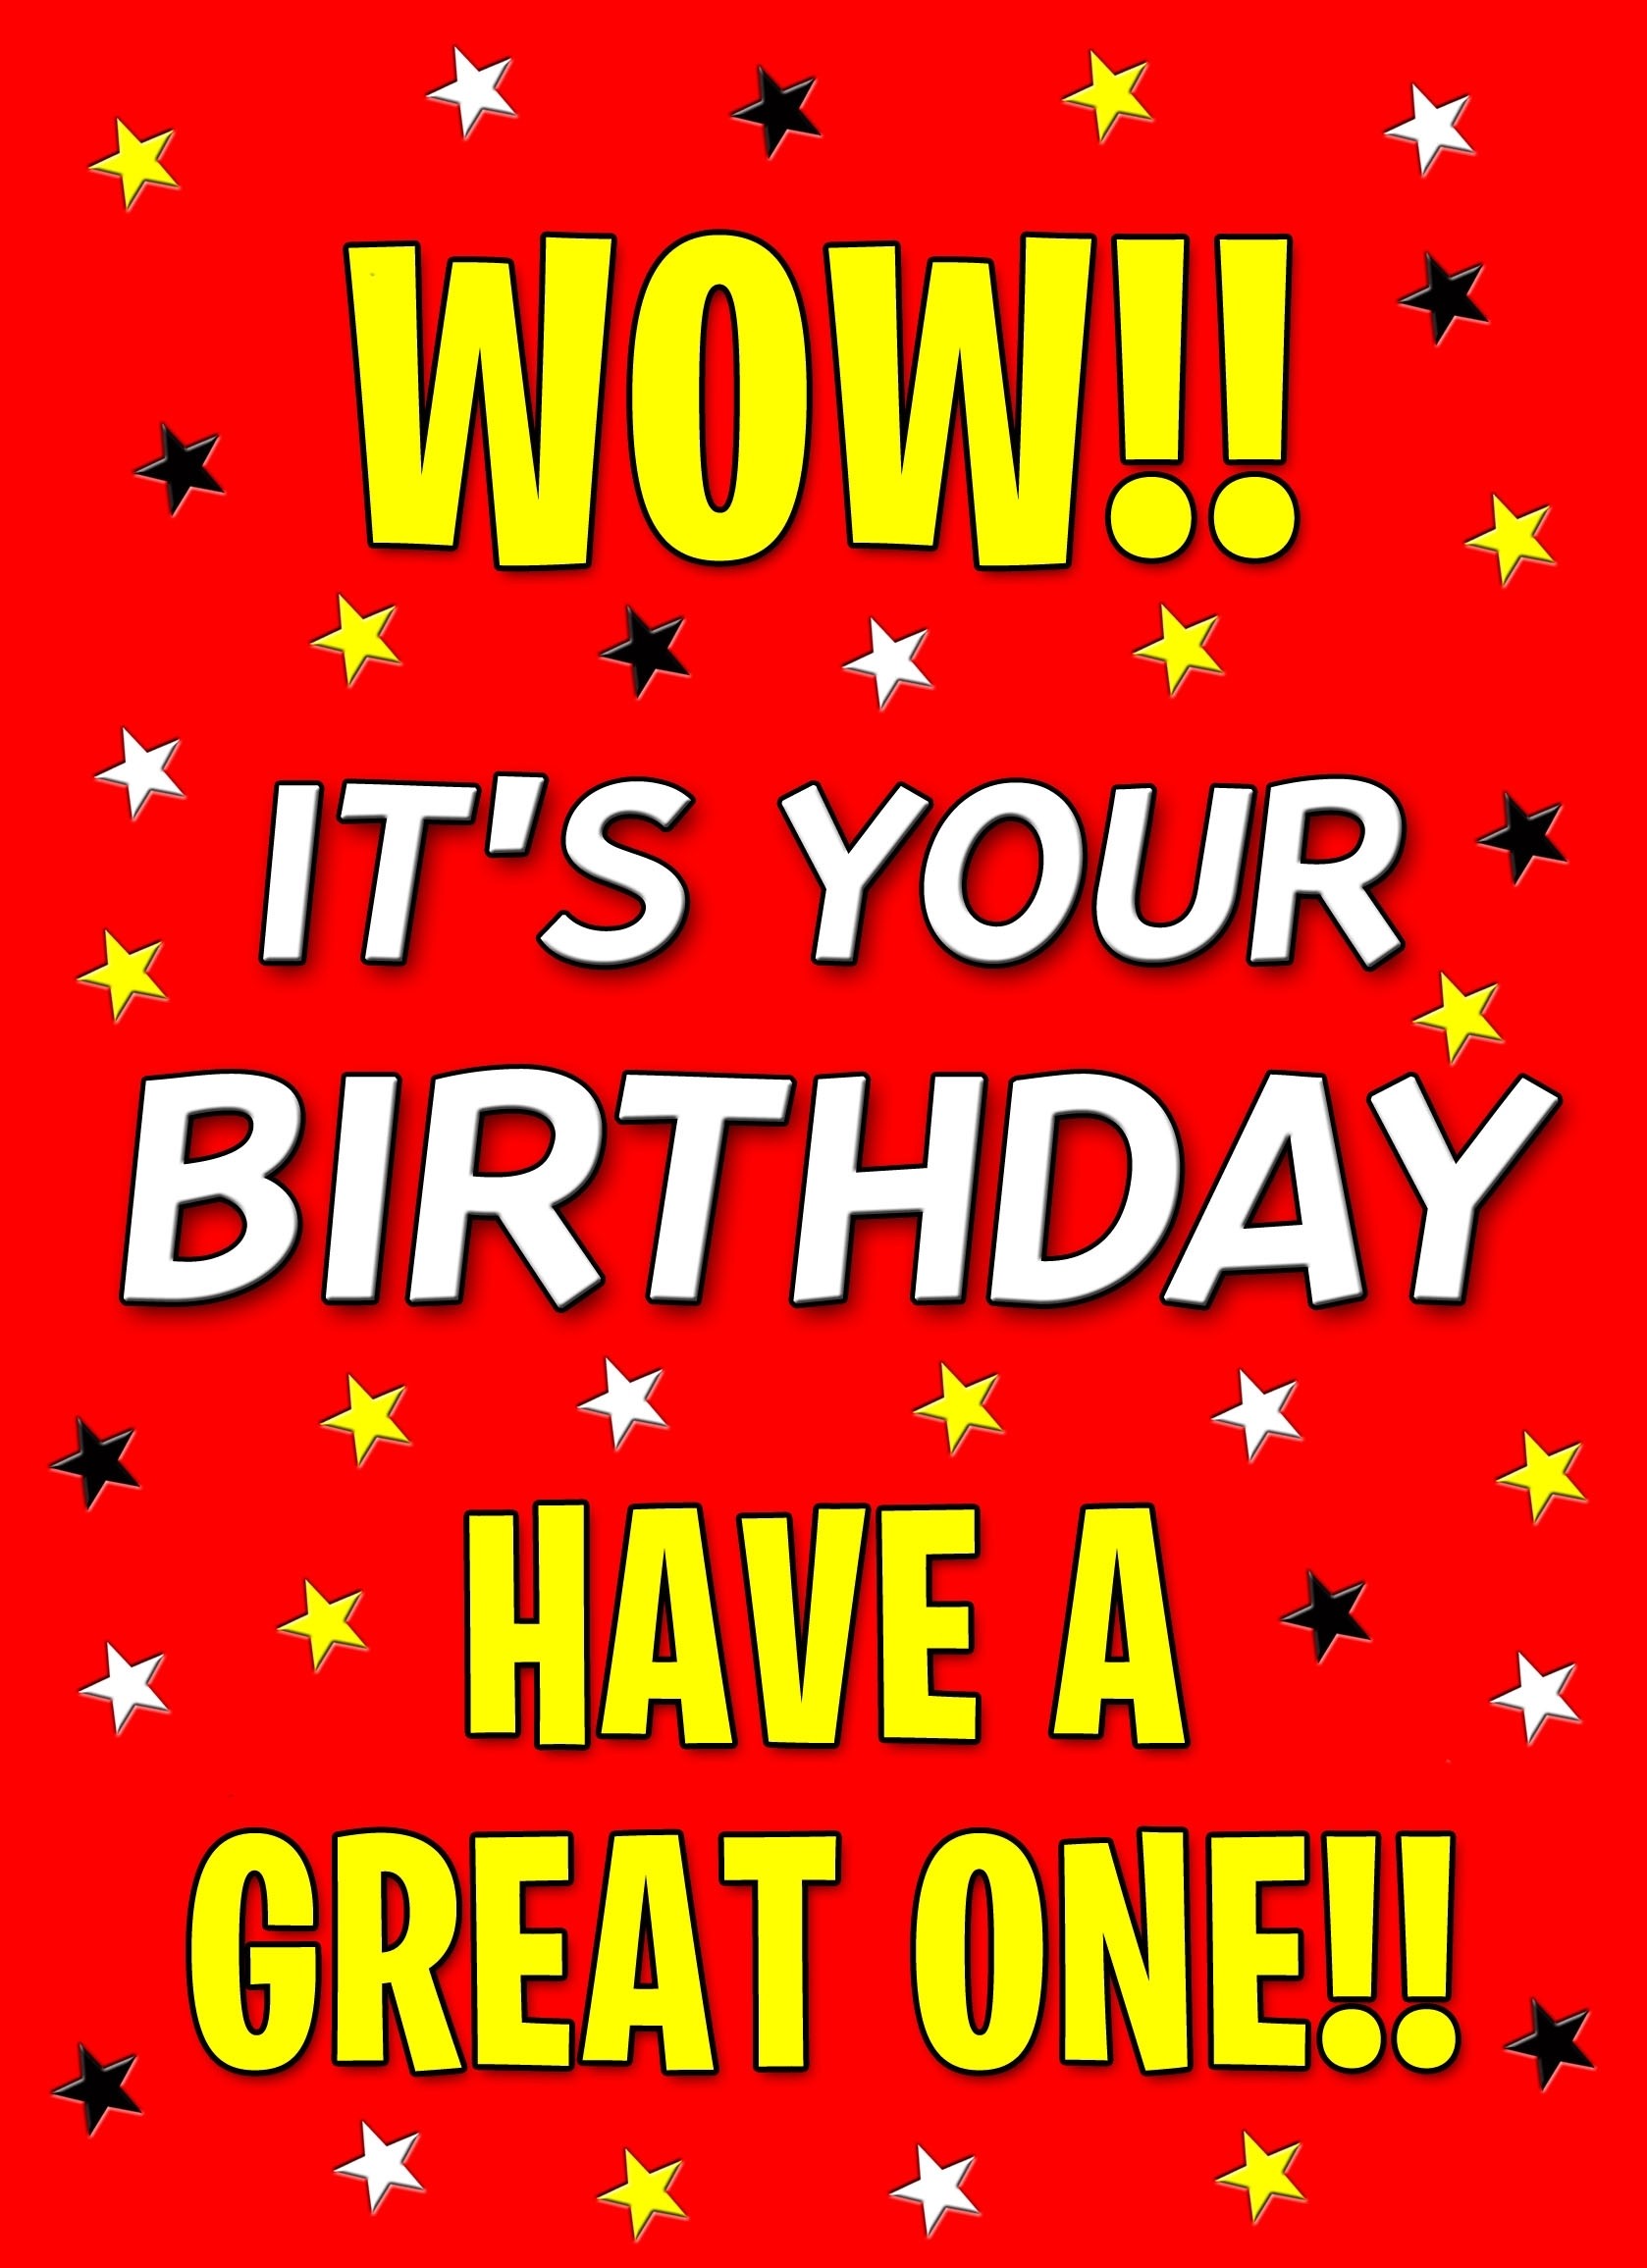 Birthday Greeting Card (Have a great one, Red)